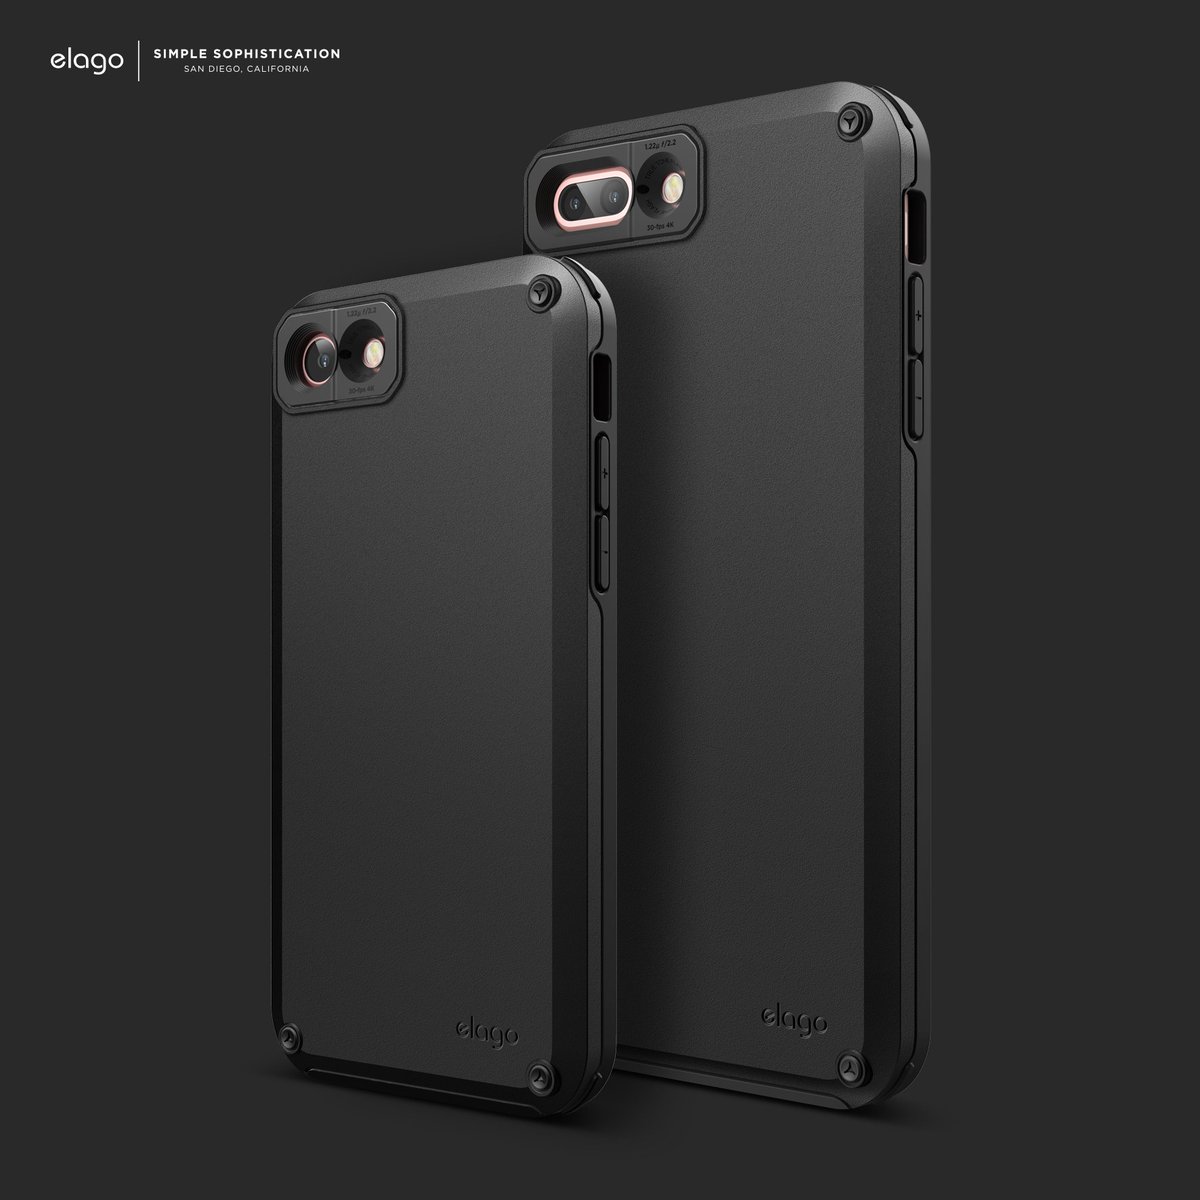 Elago Official Elago Iphone8 8 Plus Case Available Now On Amazon Armor Case For Iphone 8 8 Plus T Co Unatbencnj Iphone8 Iphone8plus Case T Co Vsekjsurvq